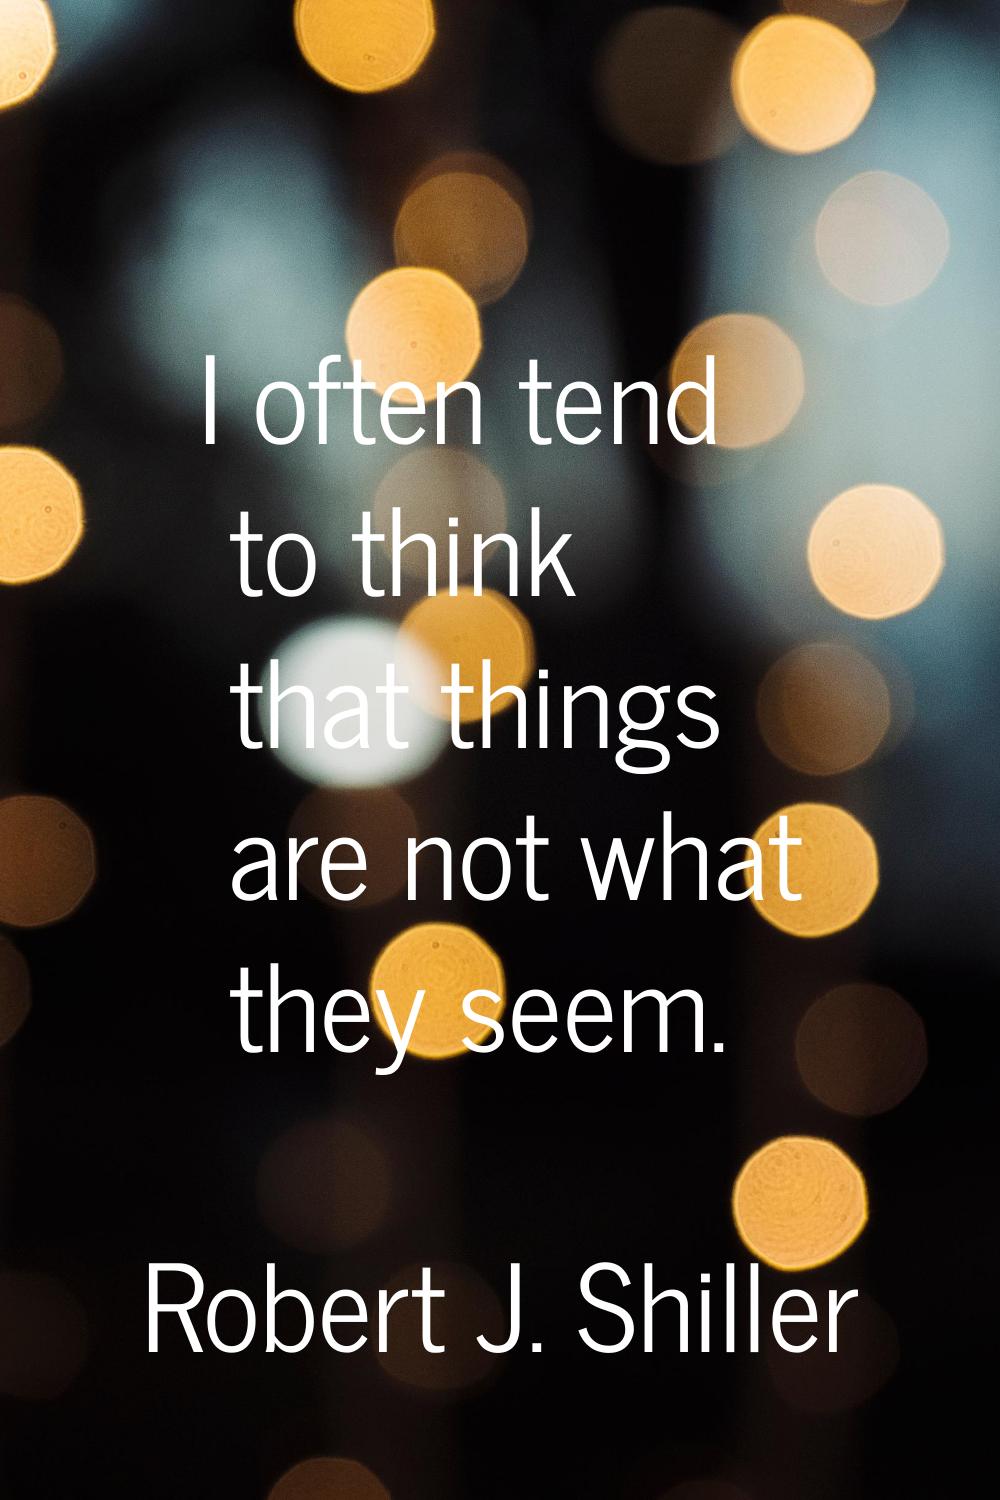 I often tend to think that things are not what they seem.